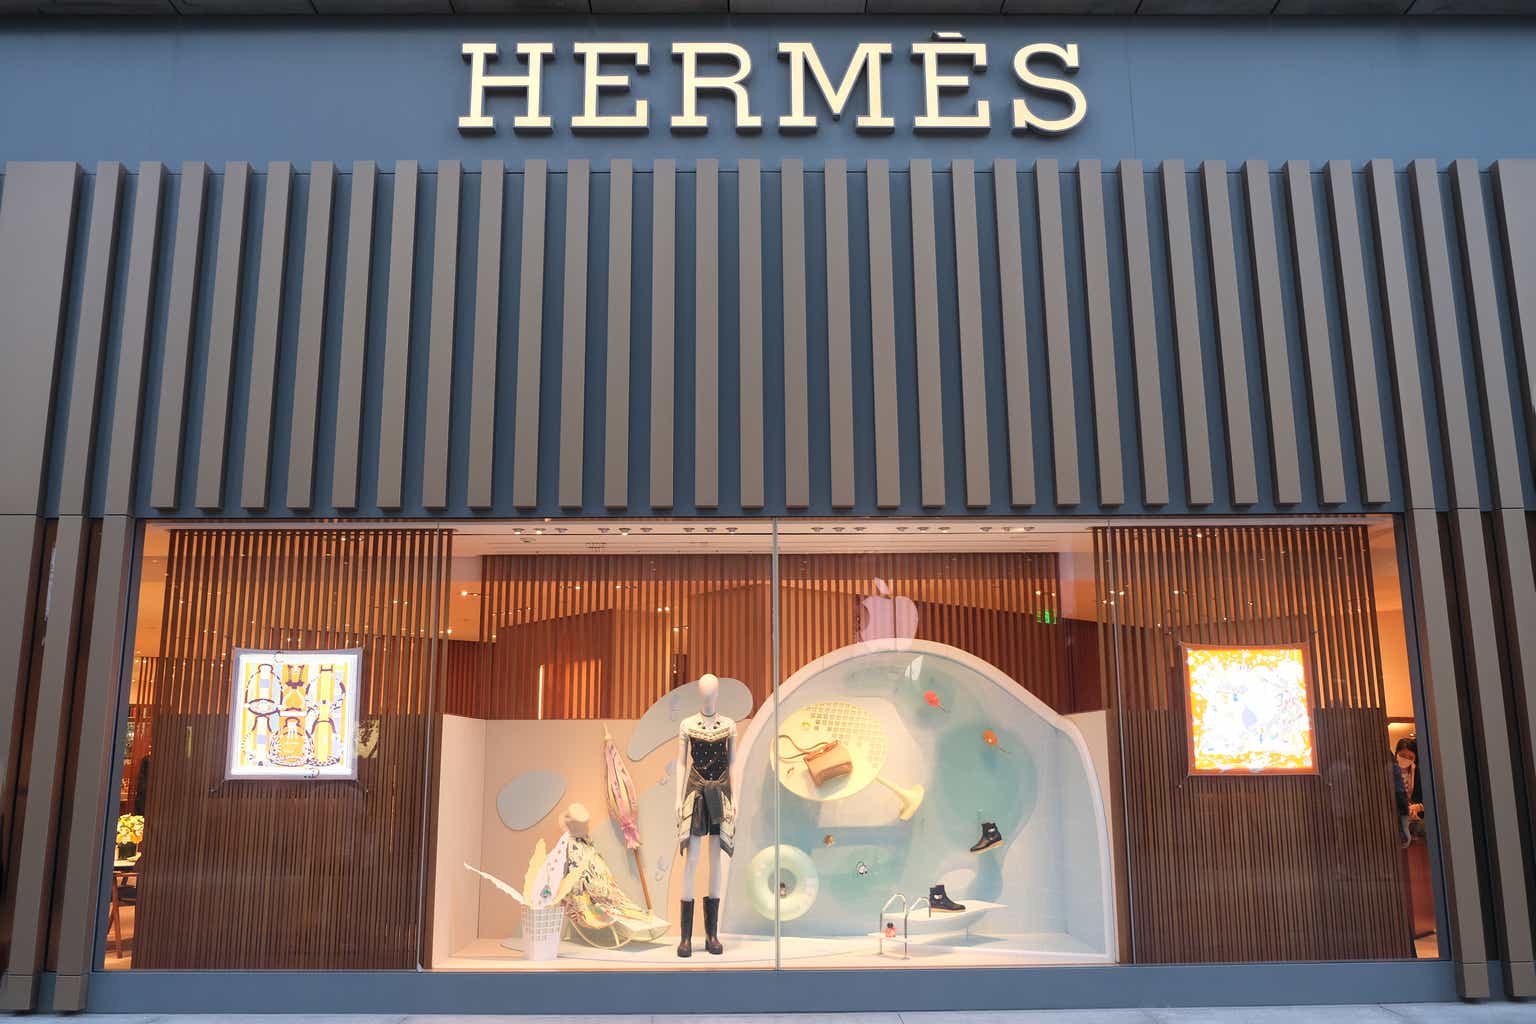 Hermes: In Its Own League, But Still Highly Priced (OTCMKTS:HESAF